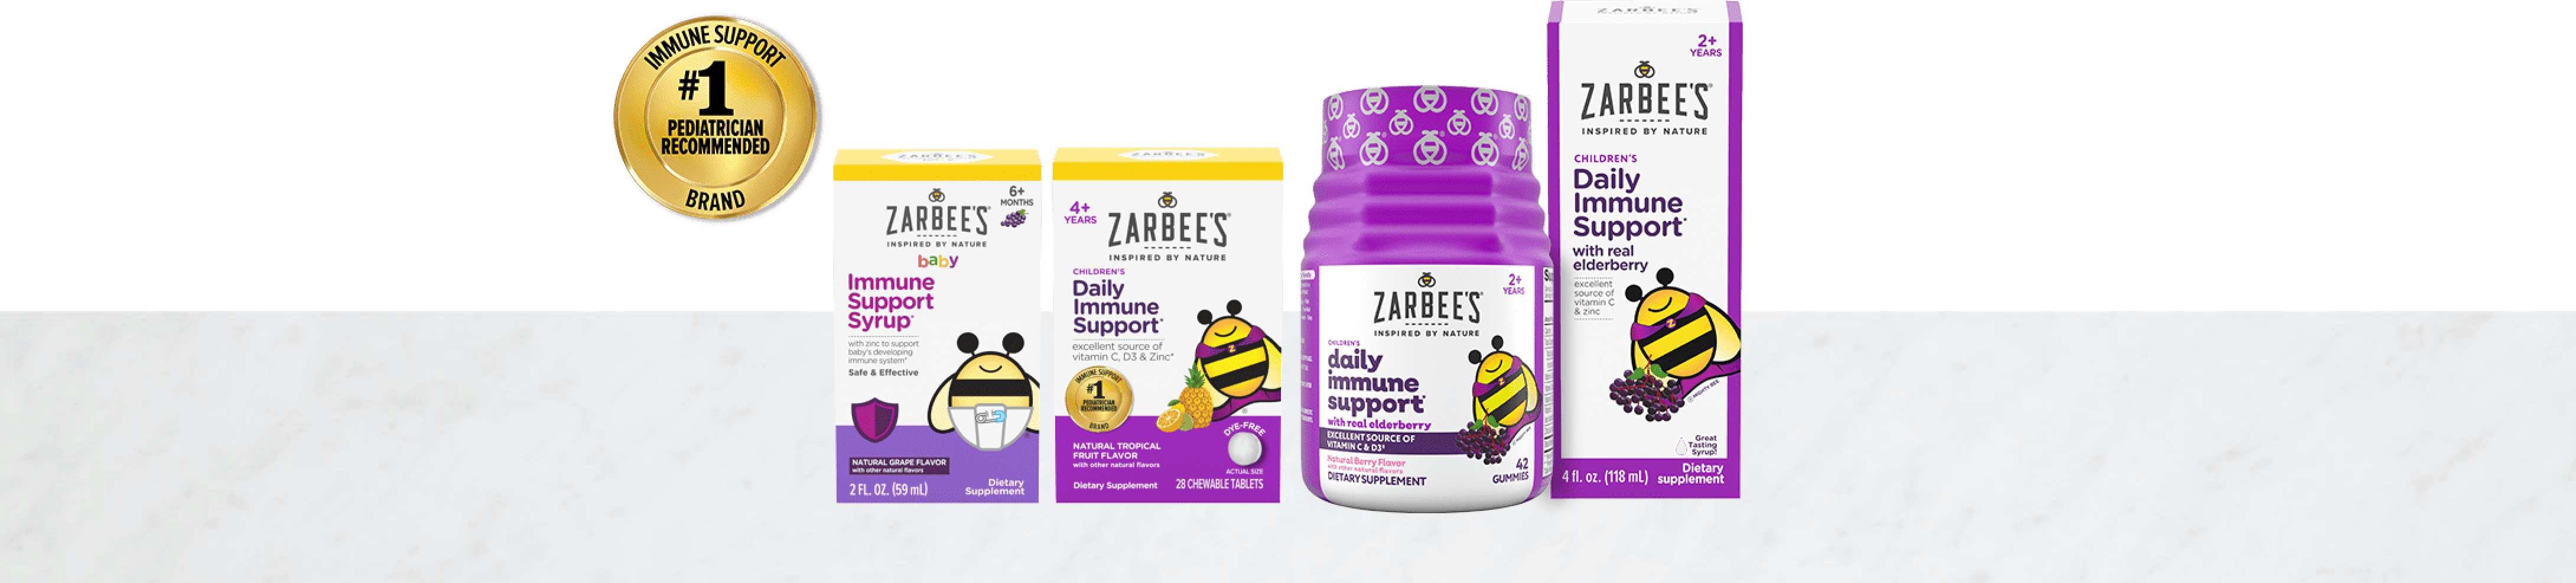 Zarbee’s immune support product packages